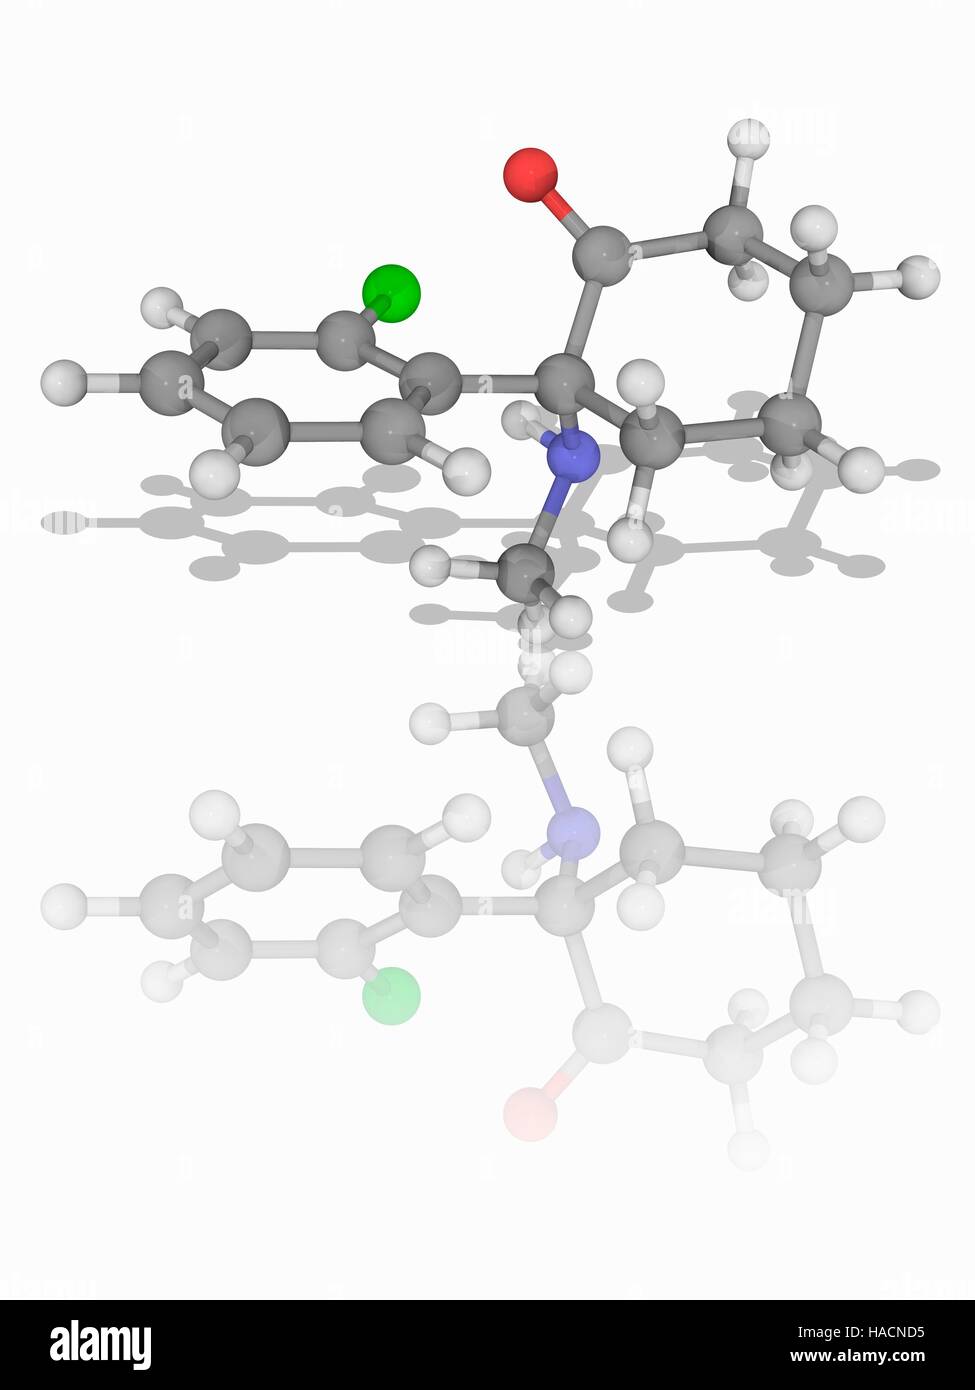 Ketamine. Molecular model of the drug ketamine (C13.H16.Cl.N.O), used in human and veterinary medicine for the induction and maintenance of general anaesthesia. It is also used as a painkiller, and illegally as a recreational drug. Atoms are represented as spheres and are colour-coded: carbon (grey), hydrogen (white), nitrogen (blue), oxygen (red) and chlorine (green). Illustration. Stock Photo